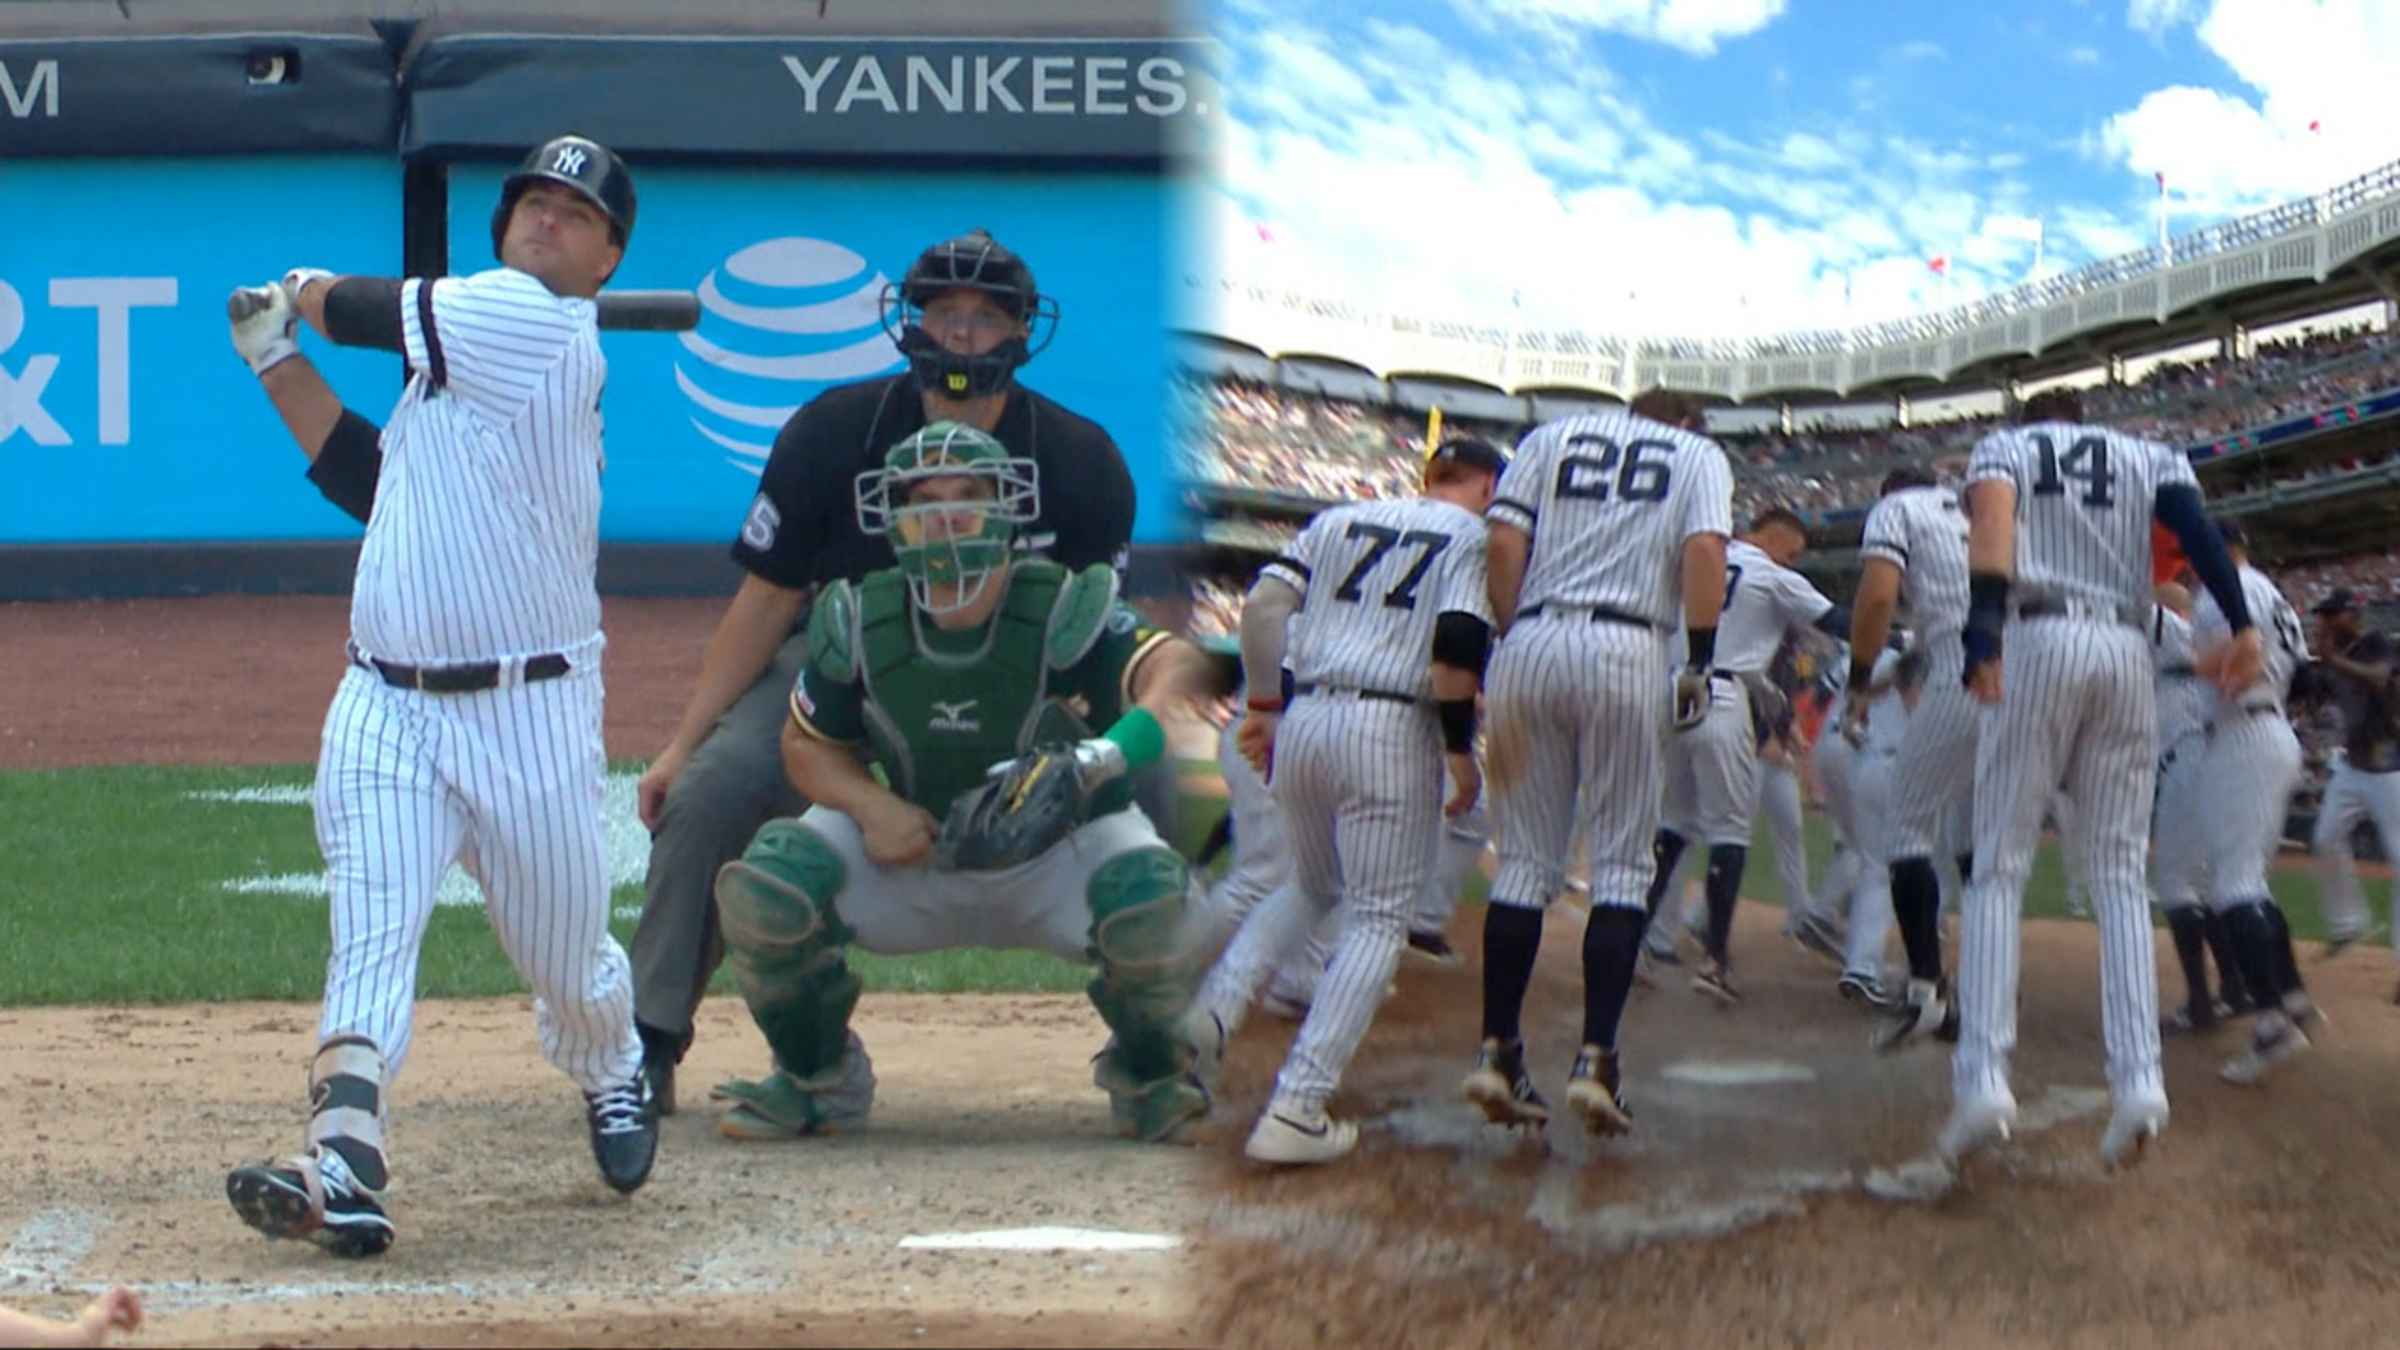 Lifelong Yankee fan Mike Ford walks off NY to sink A's, 5-4